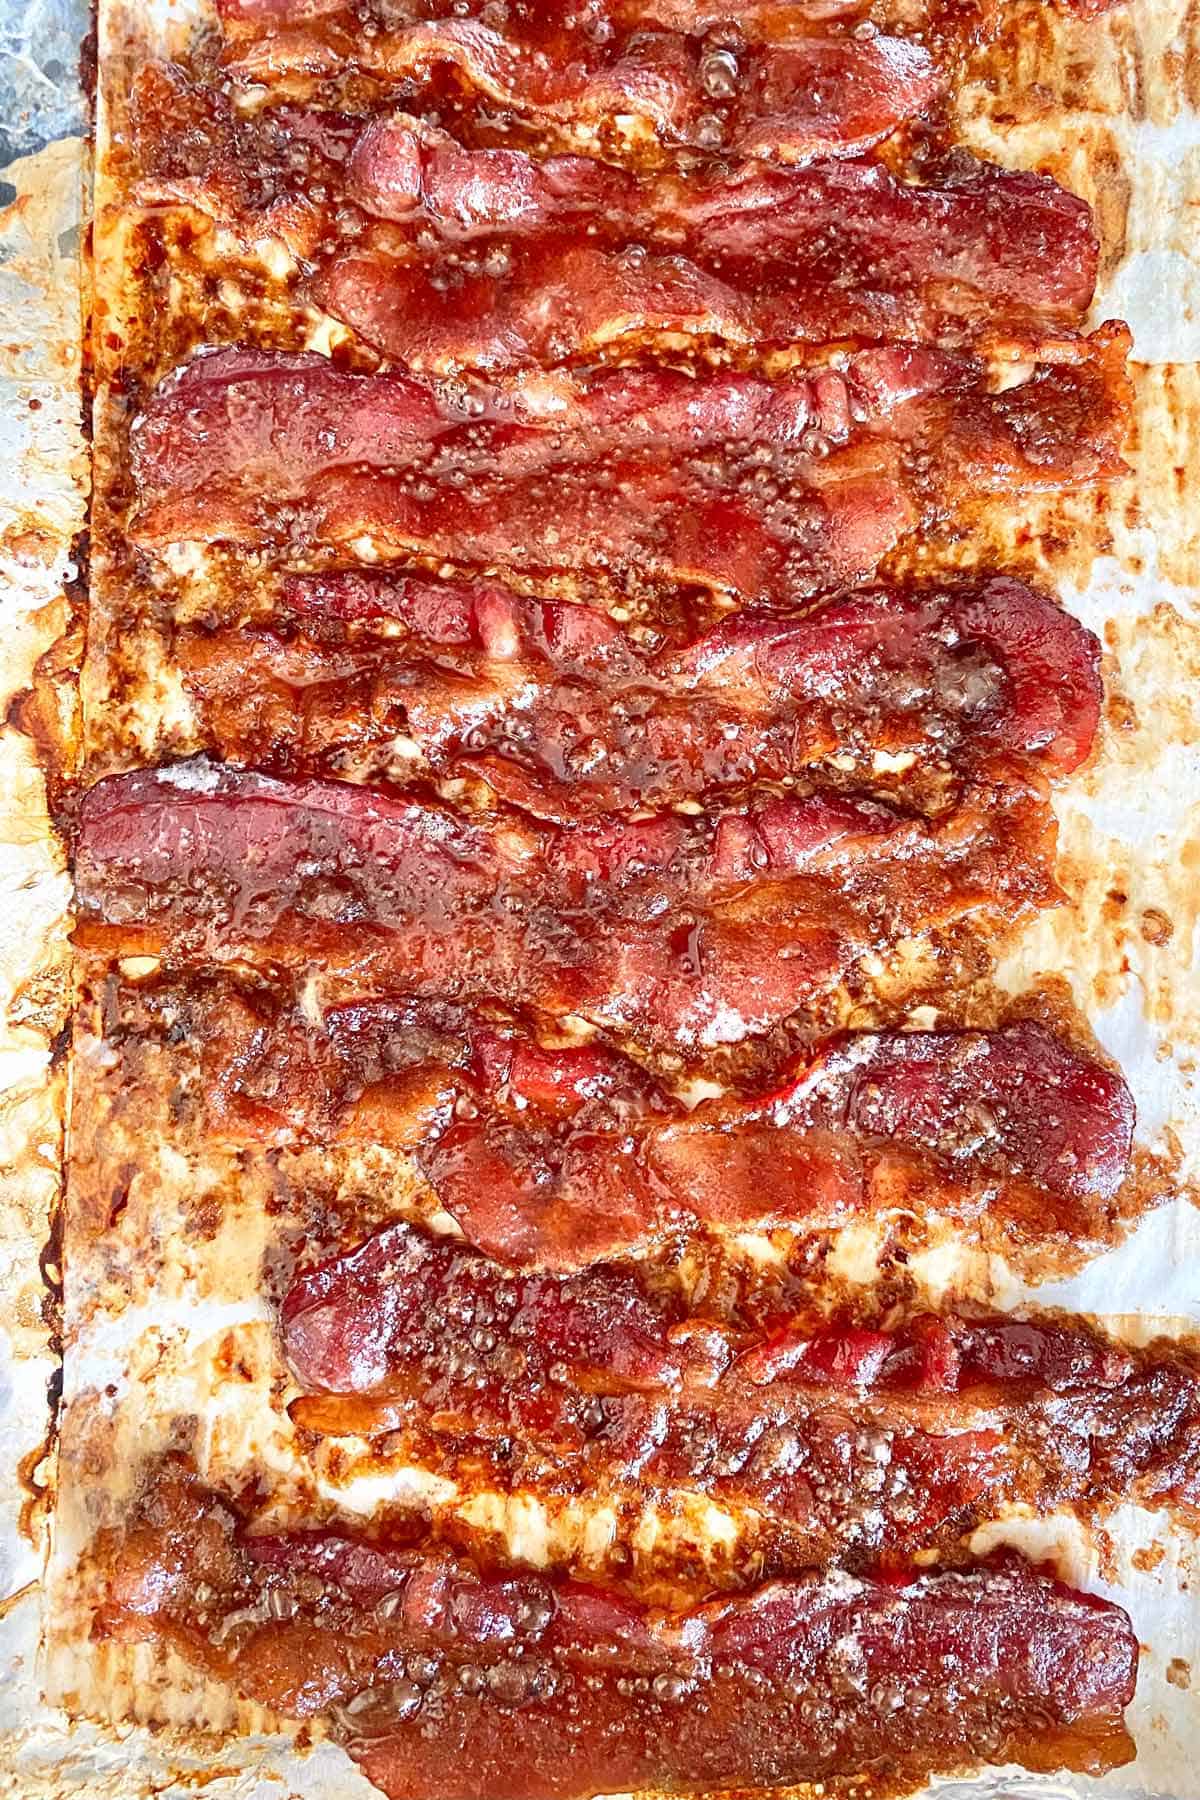 Baked crack bacon strips on a baking sheet, hot from the oven.